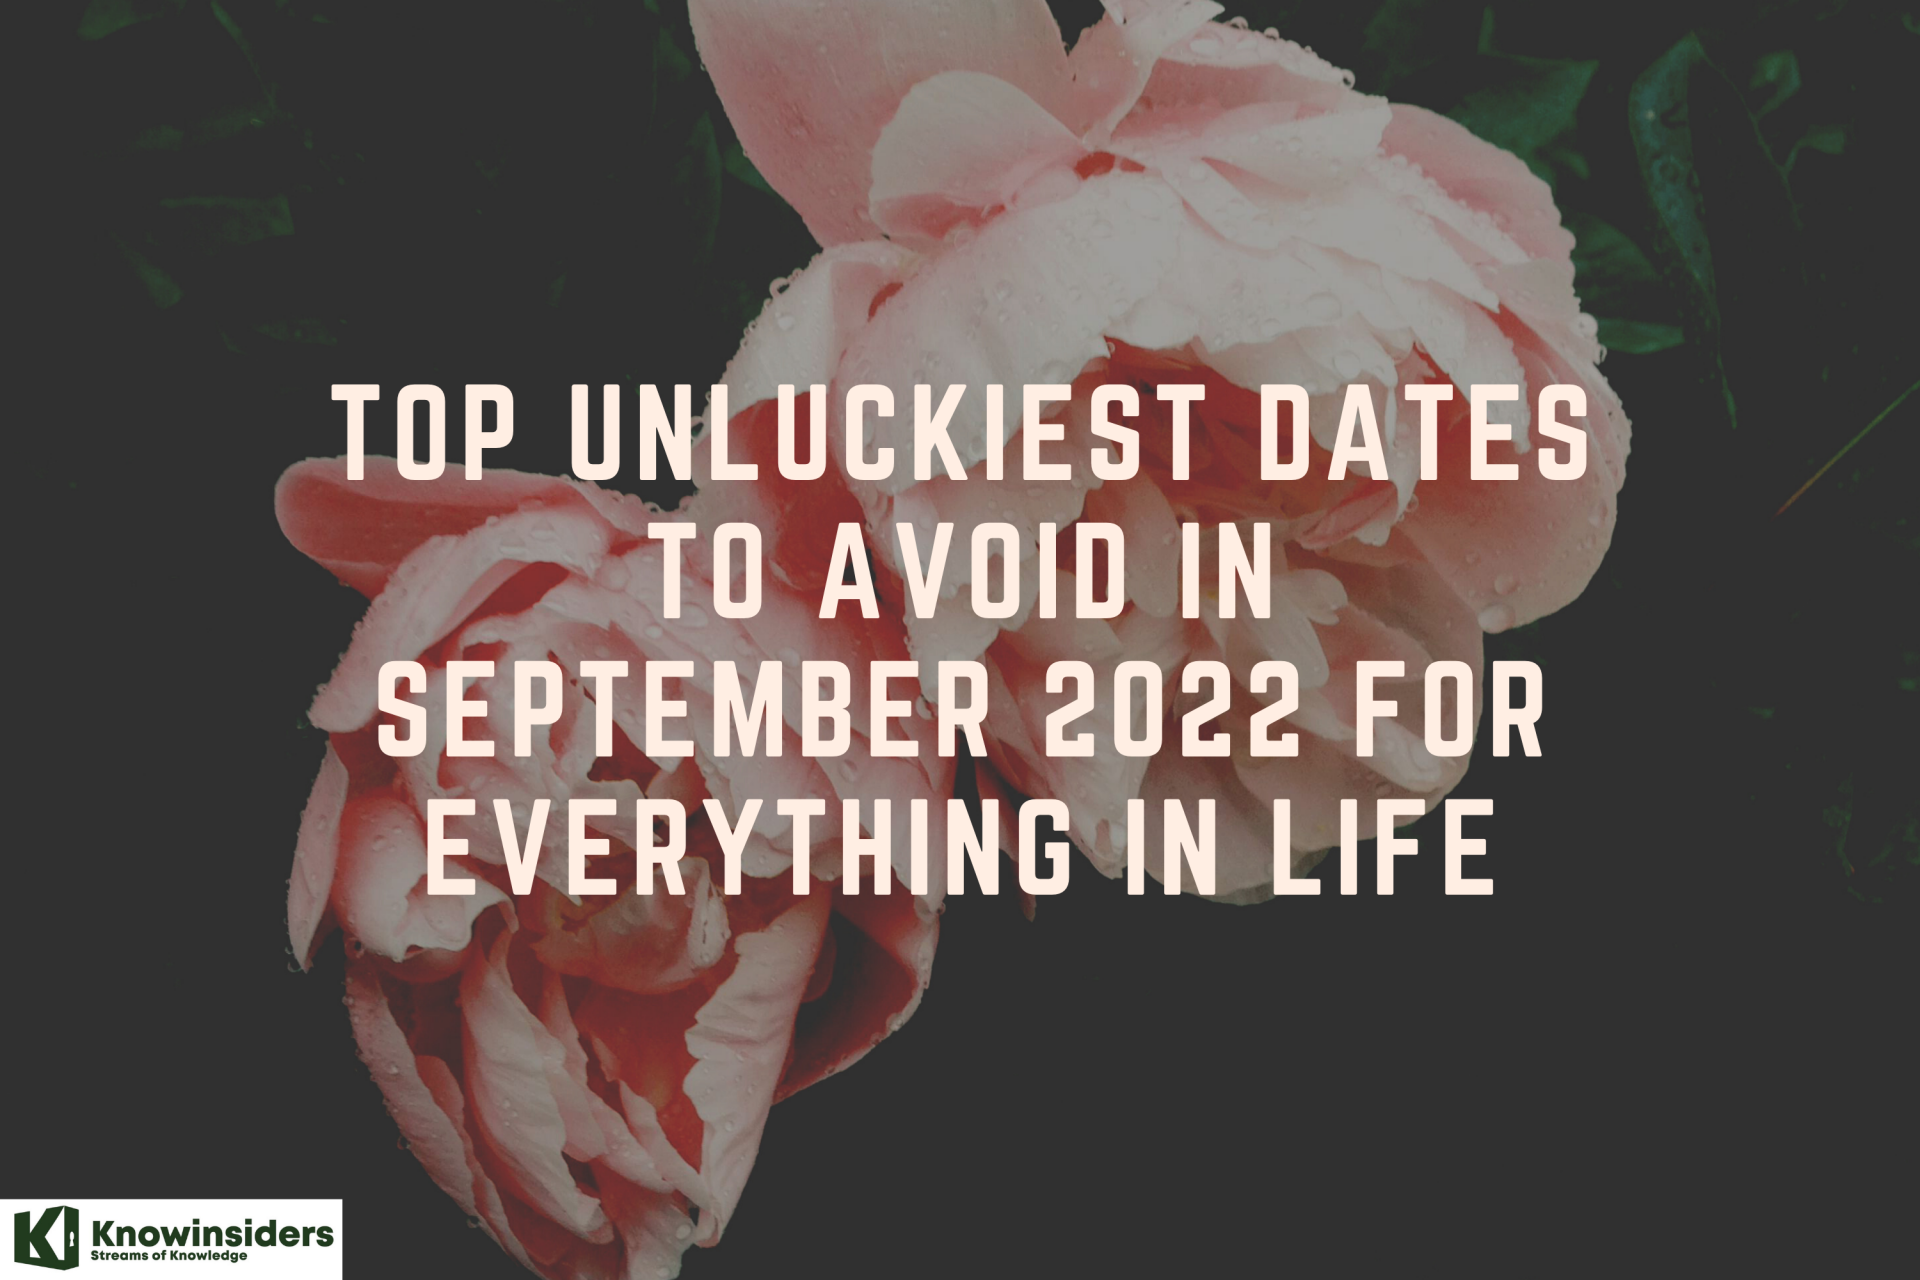 Top Unluckiest Dates To Avoid In September 2022 for Everything in Life